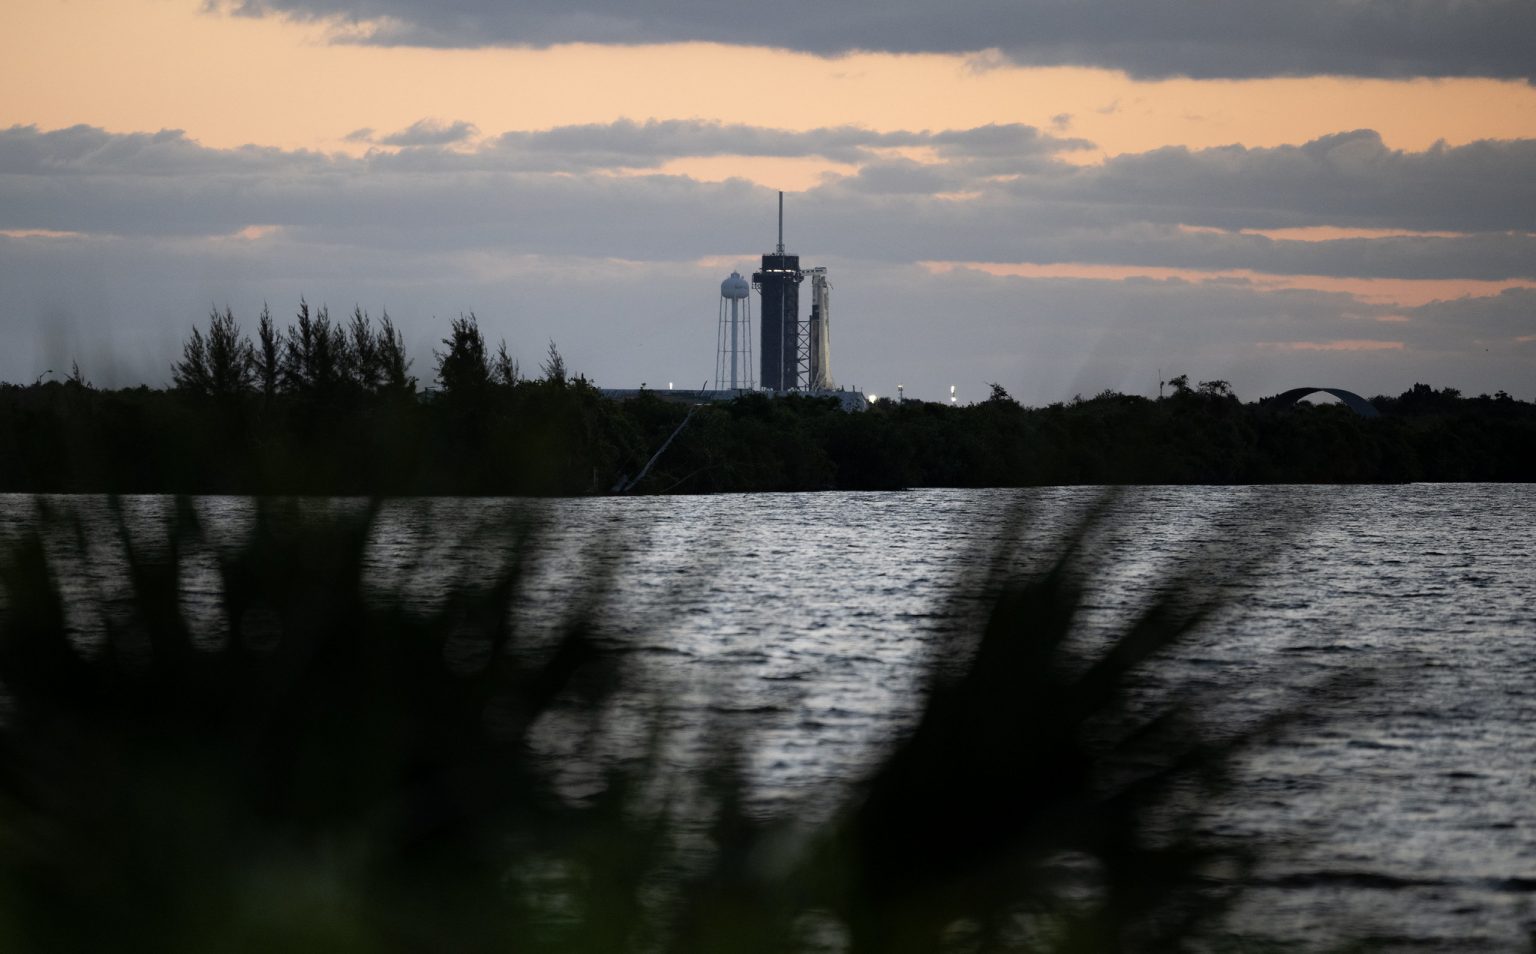 A SpaceX Falcon 9 rocket and Crew Dragon capsule, as seen on April 20, 2022, sit on Pad 39A at NASA's KSC in Florida ahead of the SpaceX Crew-4 launch on April 23, 2022.